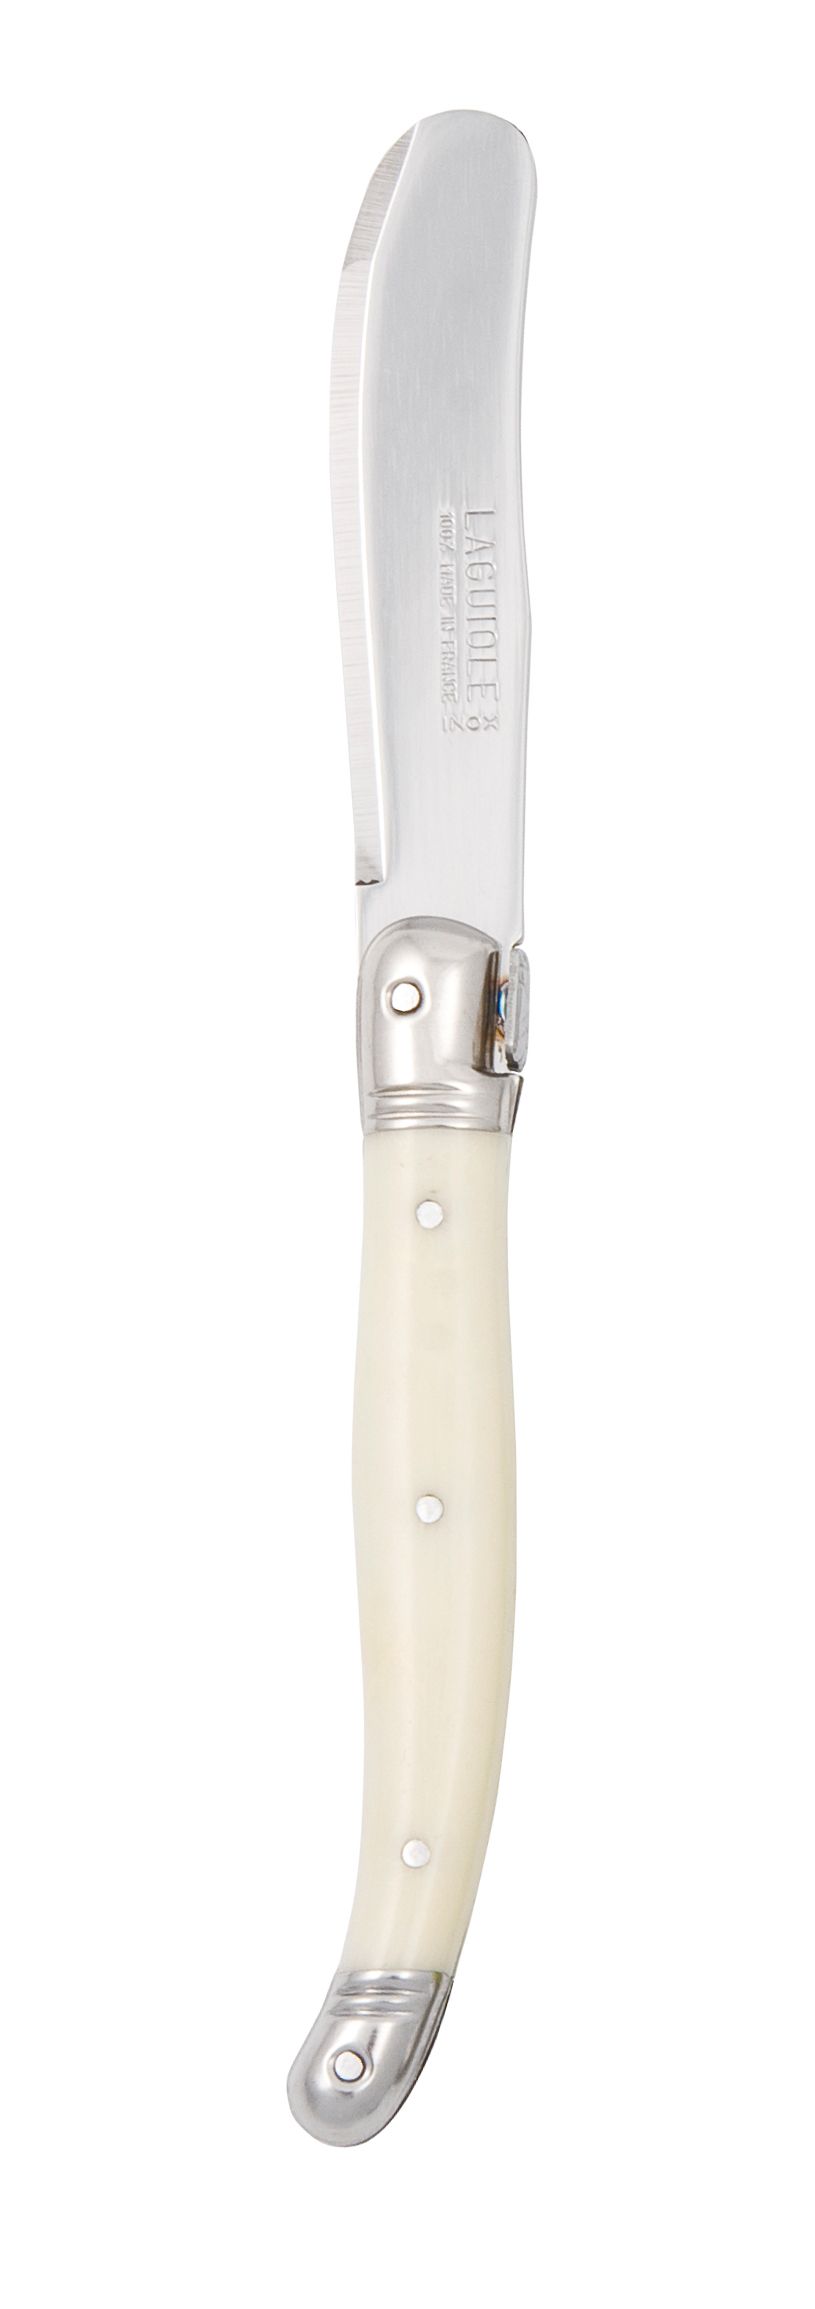 Debutant Butter Knife | Ivory Laguiole by Andre Verdier